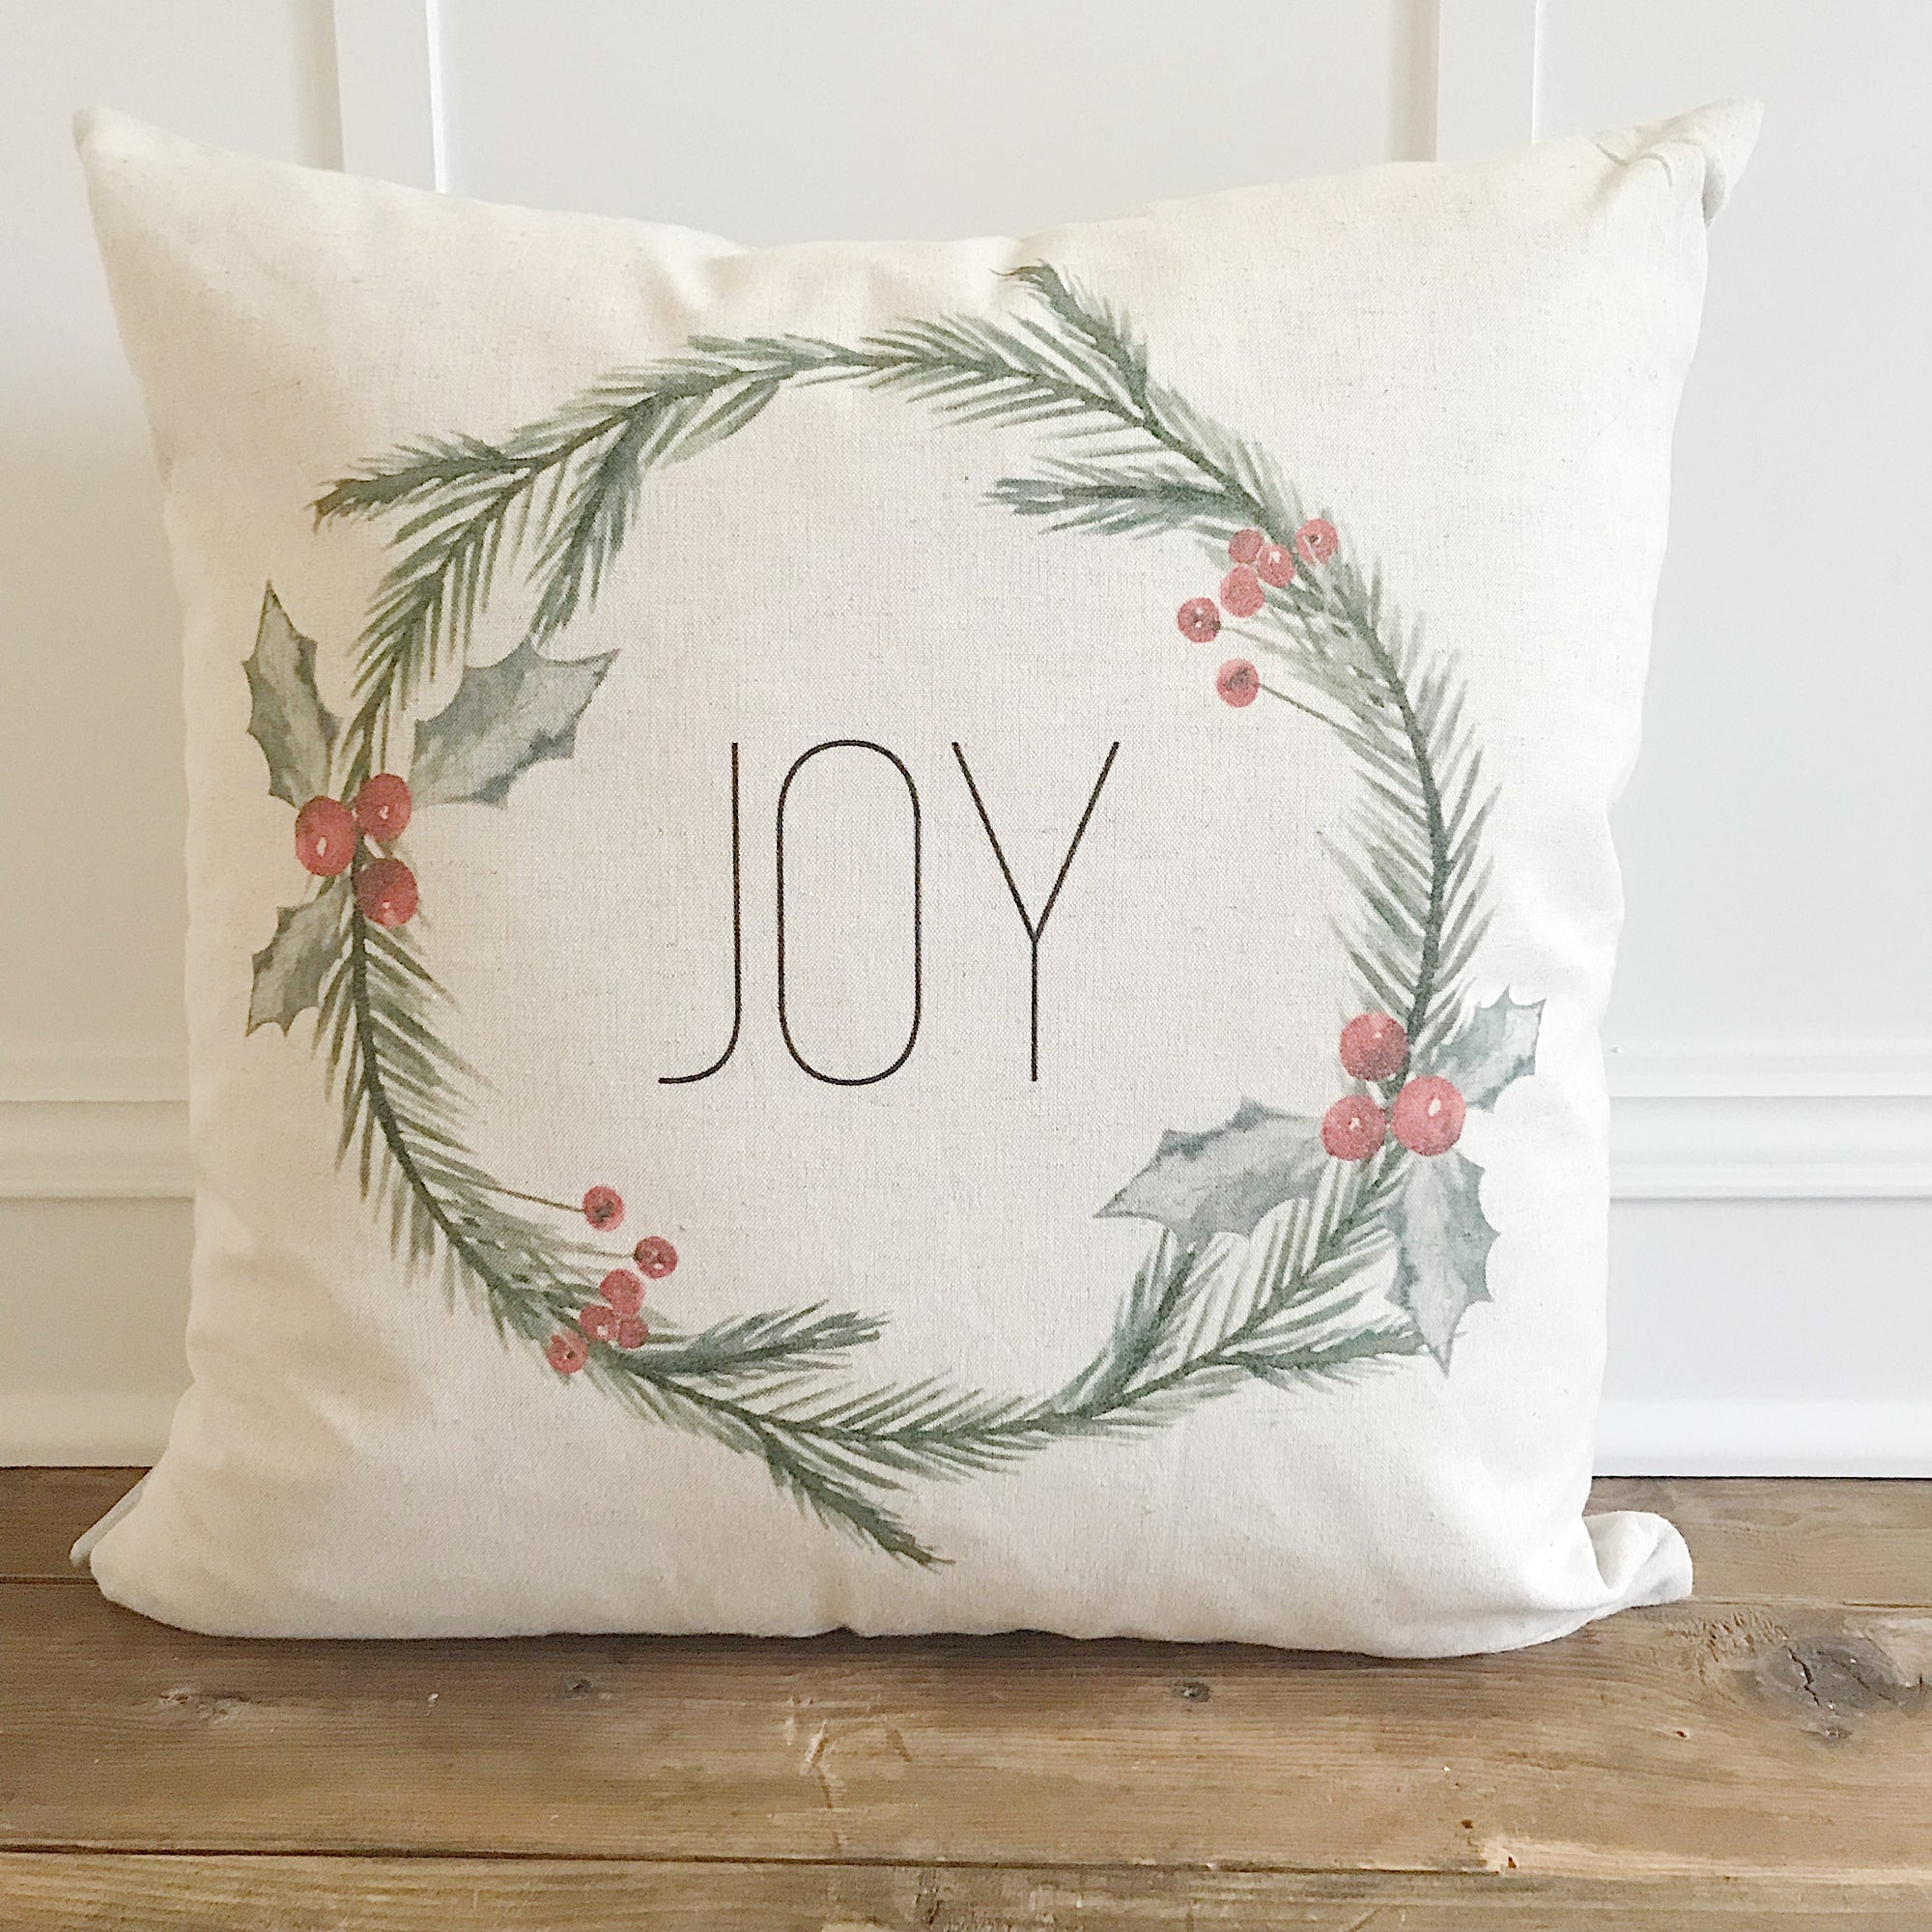 Joy Wreath Pillow Cover - Linen and Ivory